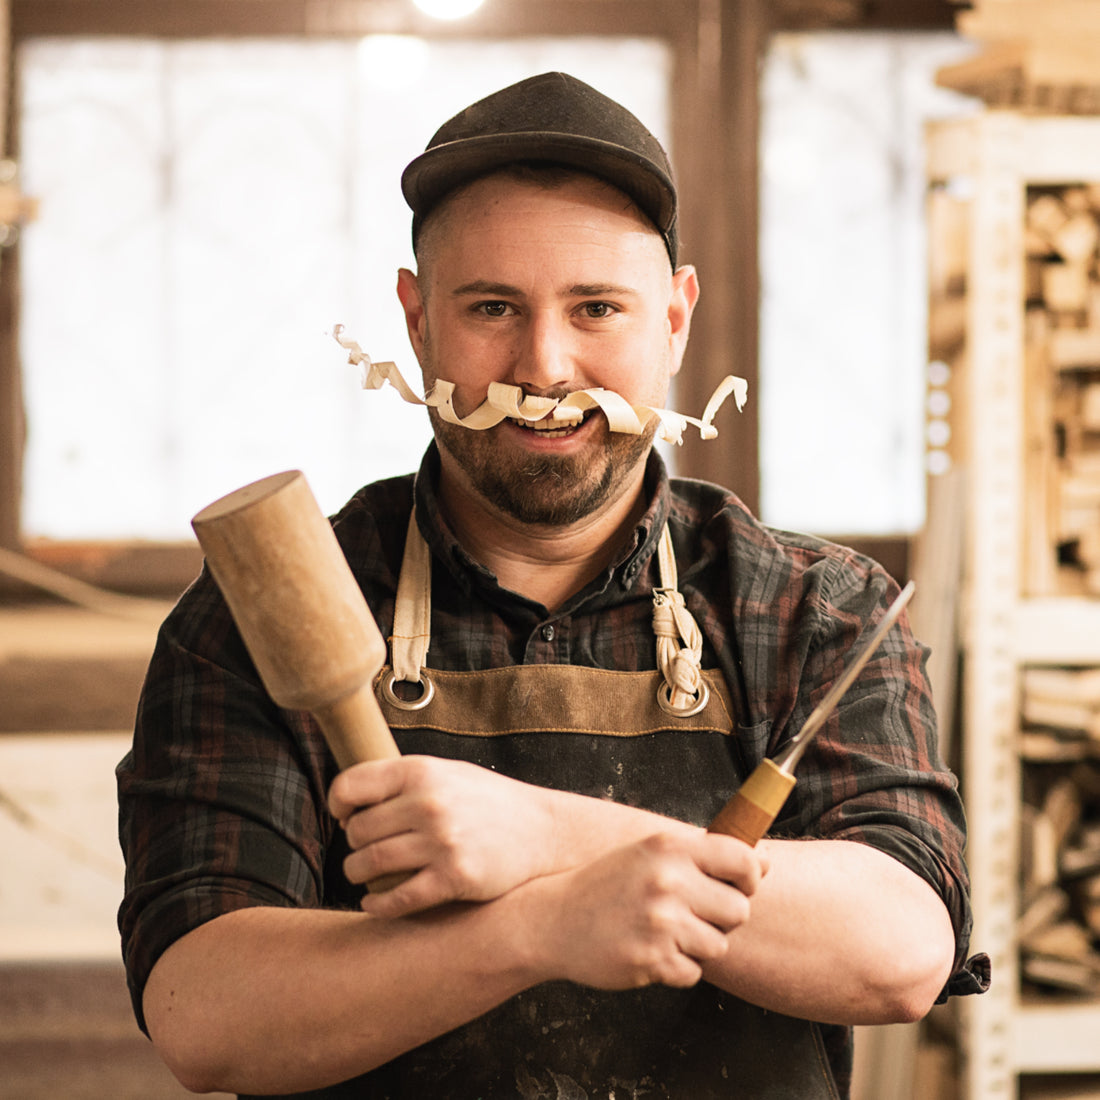 Woodworker with a curly wood shaving mustache and crossed arms holding a mallet and awl